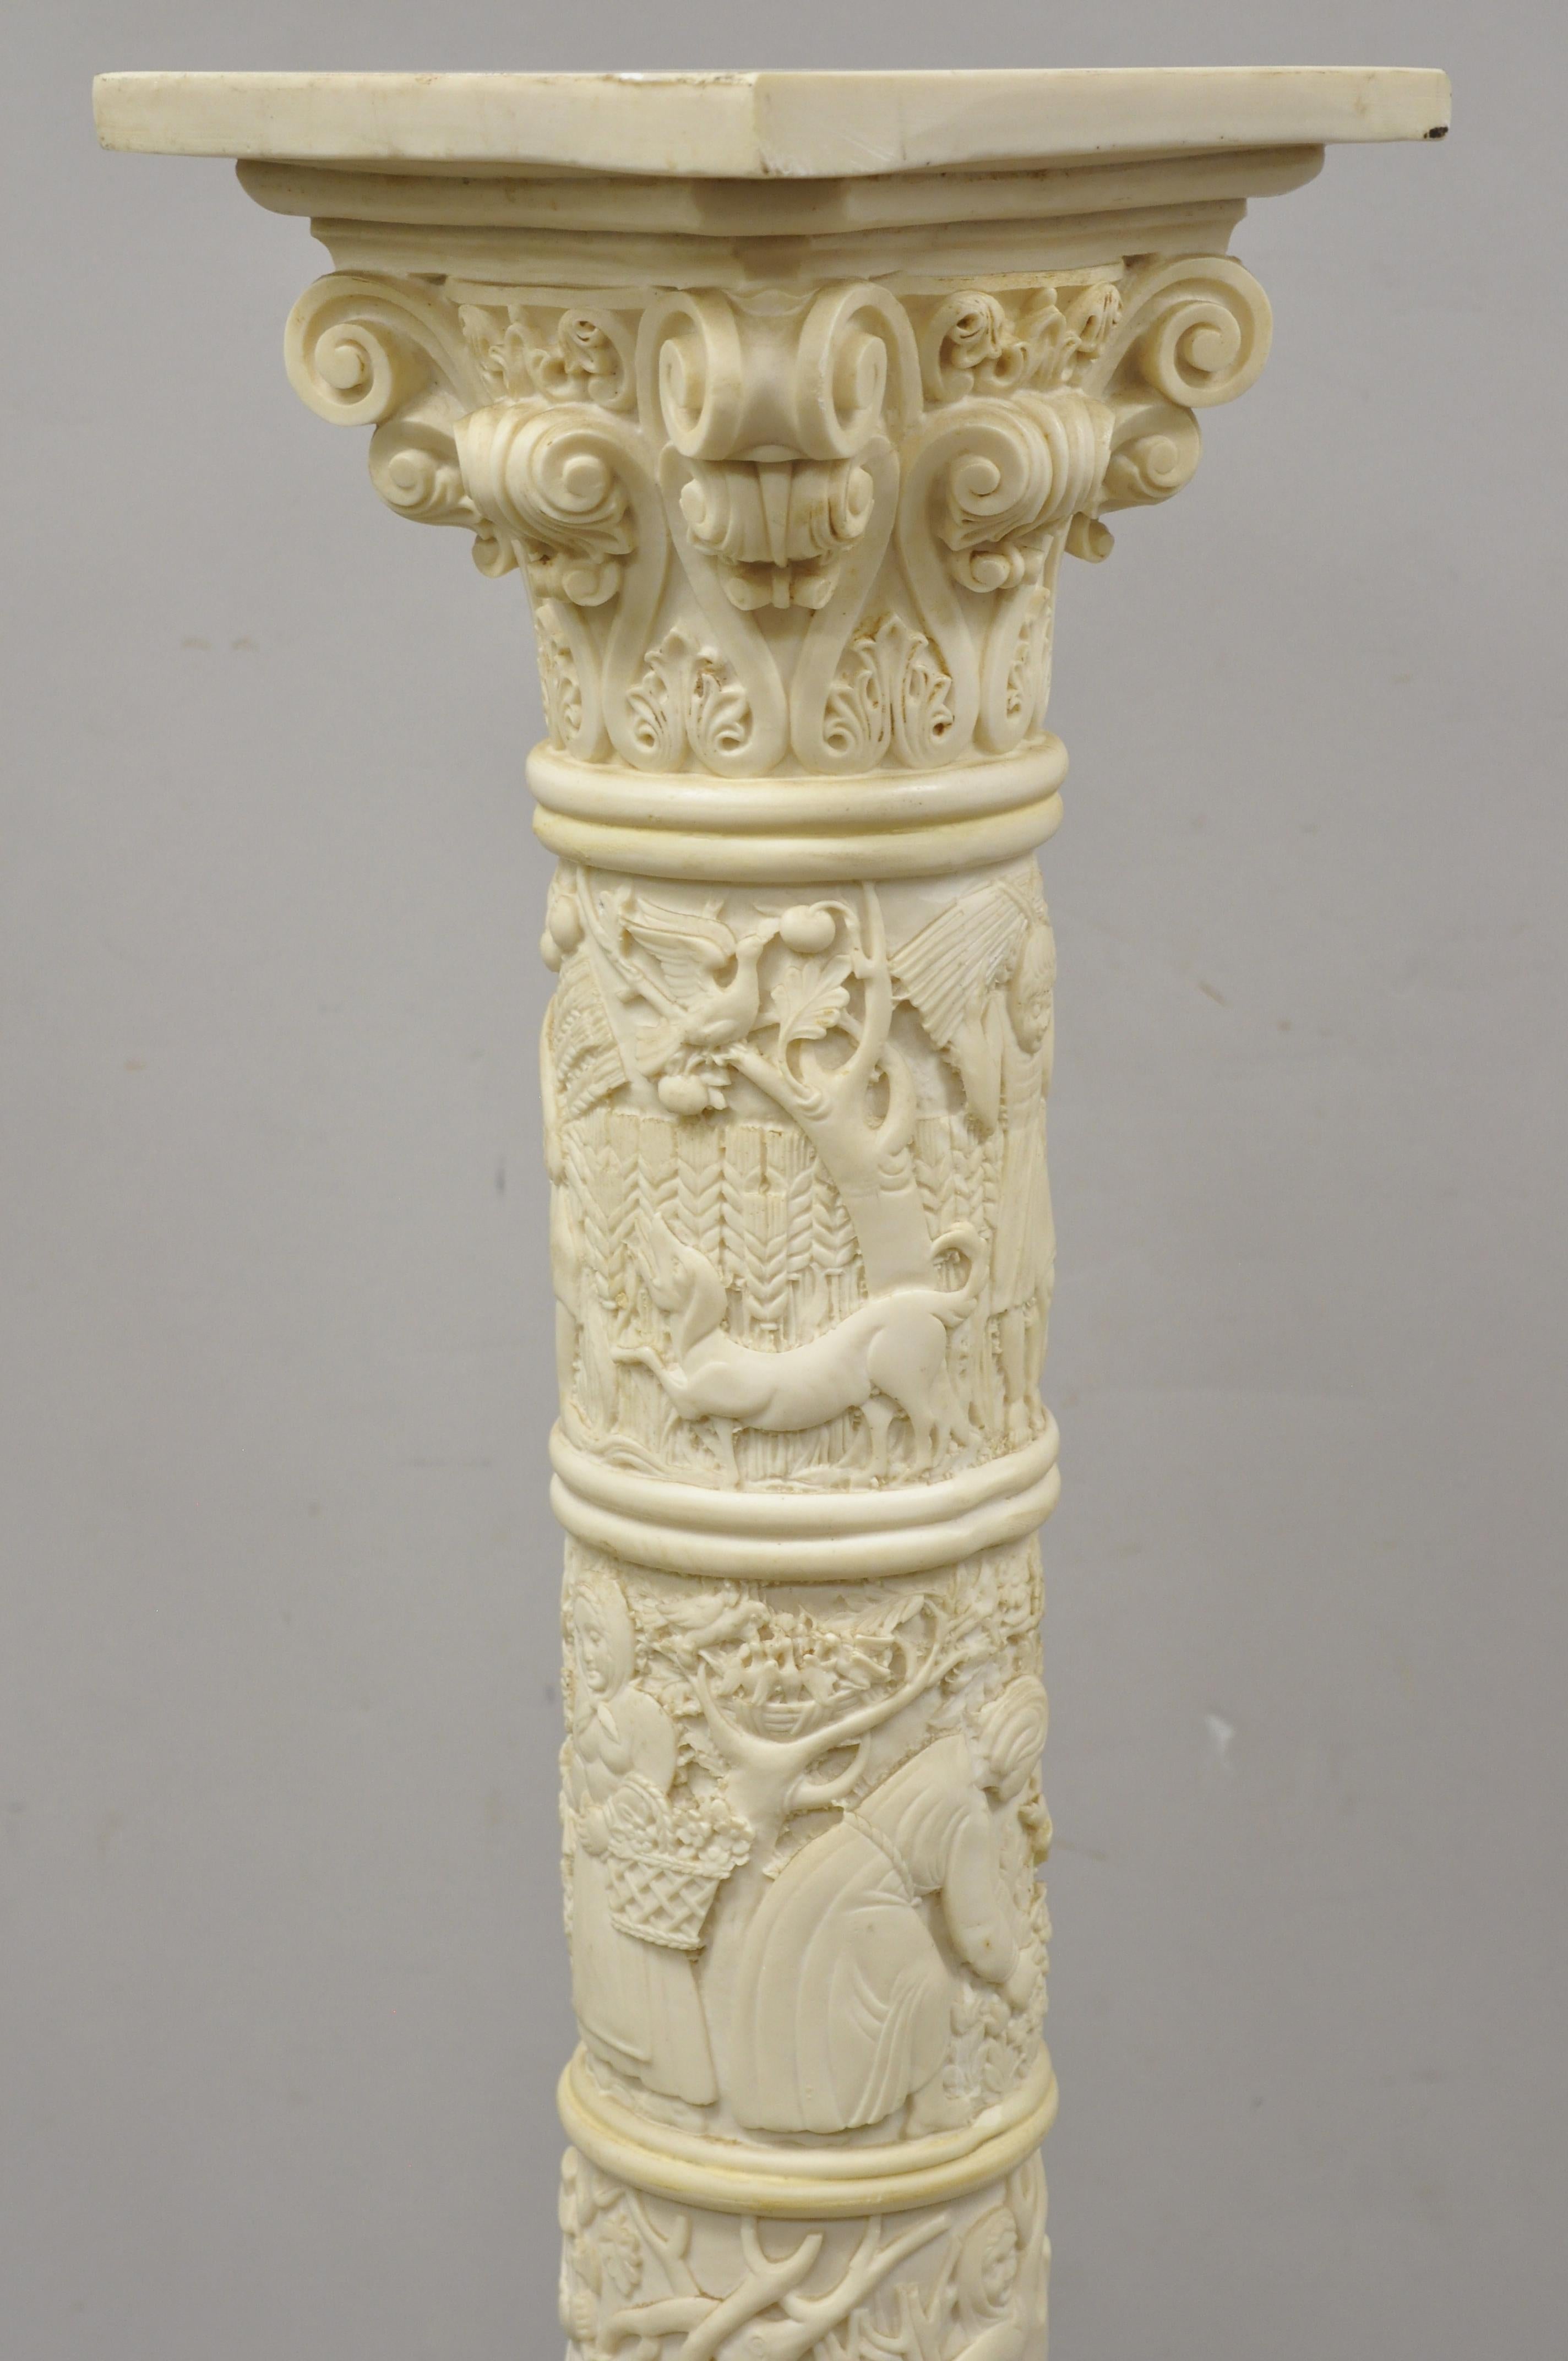 Vintage Corinthian column carved resin folklore scene Grecian pedestal plant stand. Item features heavy figural carved solid resin construction, Corinthian column top, unique 